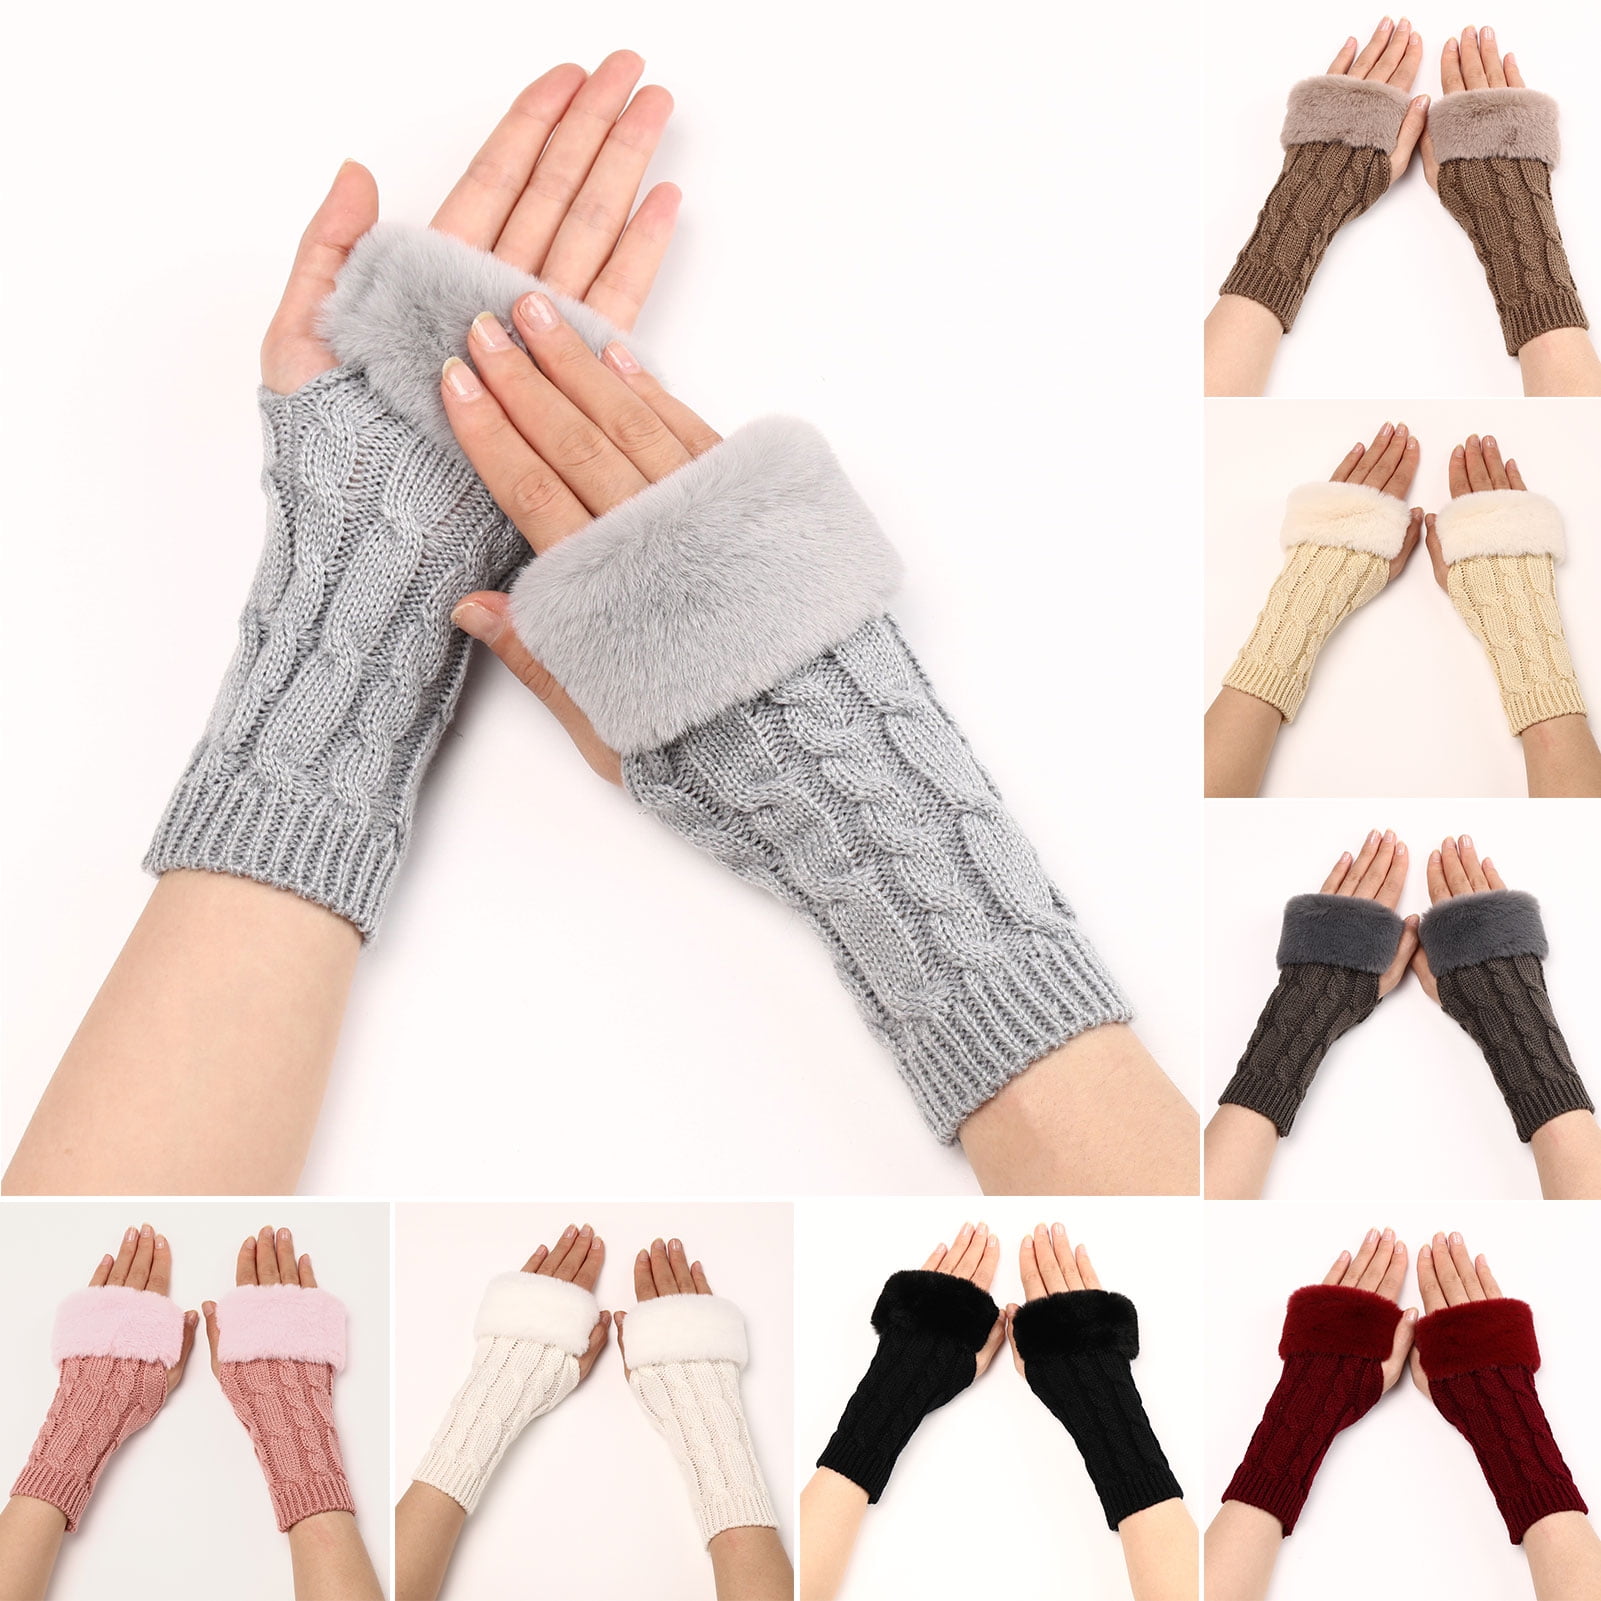 Grofry 1 Pair Knitted Gloves Fuzzy Fingerless Stretchy Thumb Hole Soft Keep Warm Solid Color Autumn Winter Women Writing Gloves for Outdoor, Women's